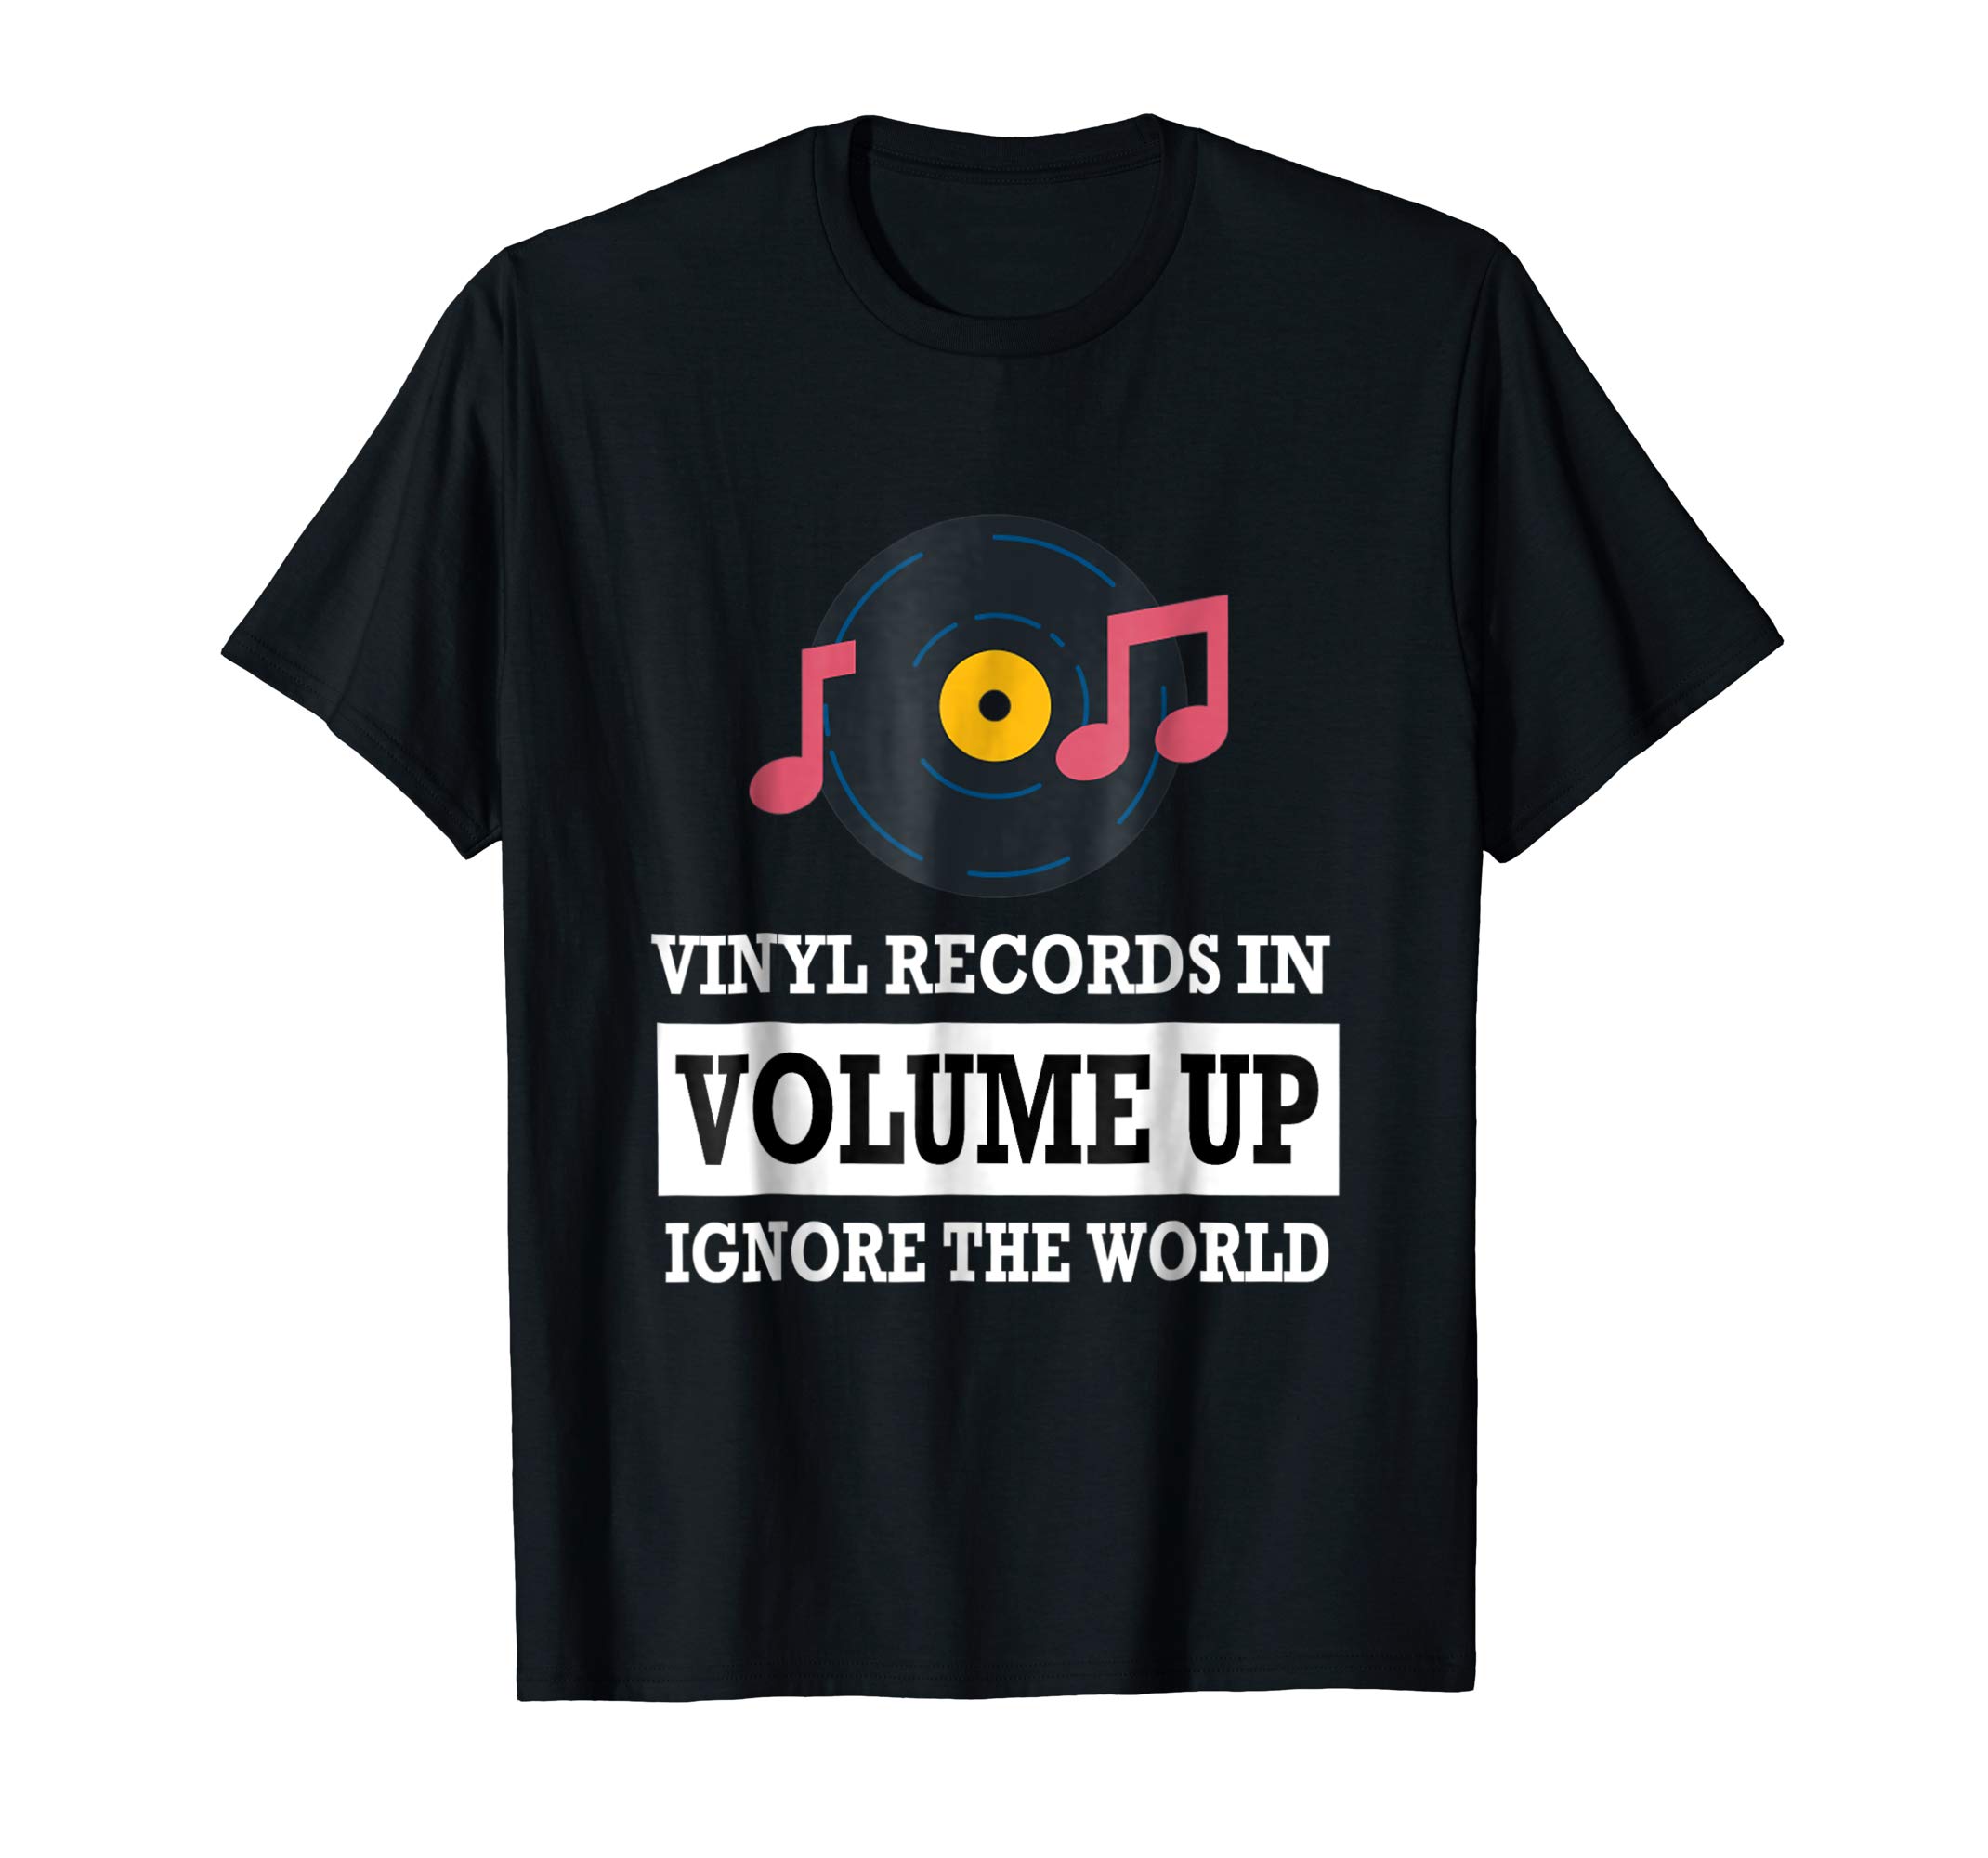 Vinyl Records In Volume Up Ignore The World T-shirt.